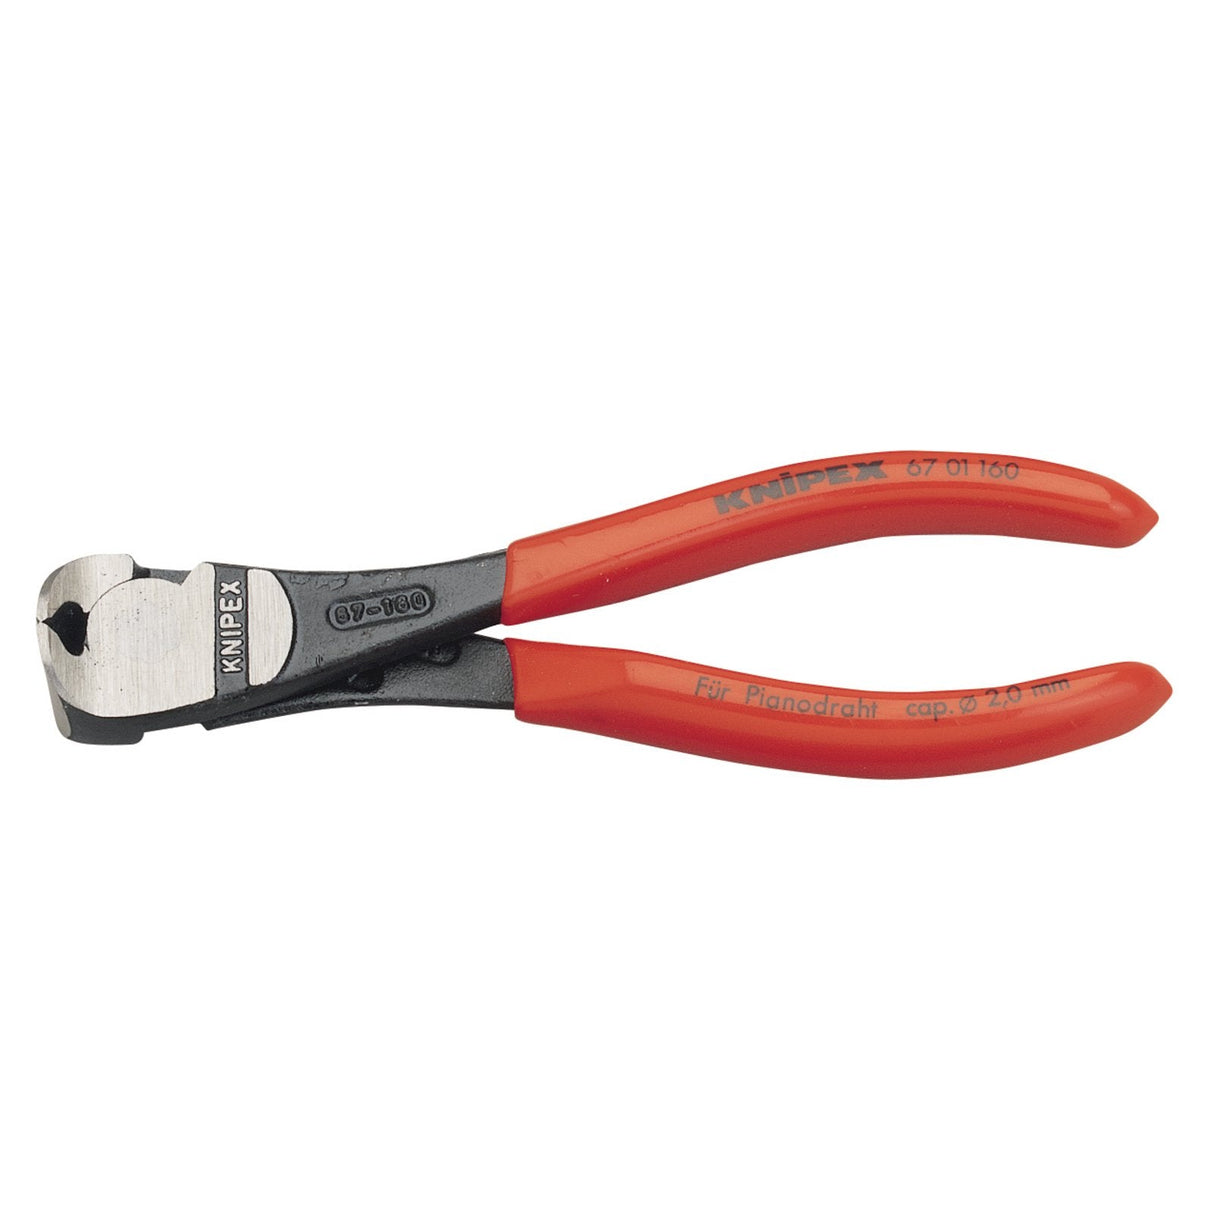 Draper Knipex 67 01 160 Sbe High Leverage End Cutting Nippers, 160mm - 67 01 160 SBE - Farming Parts